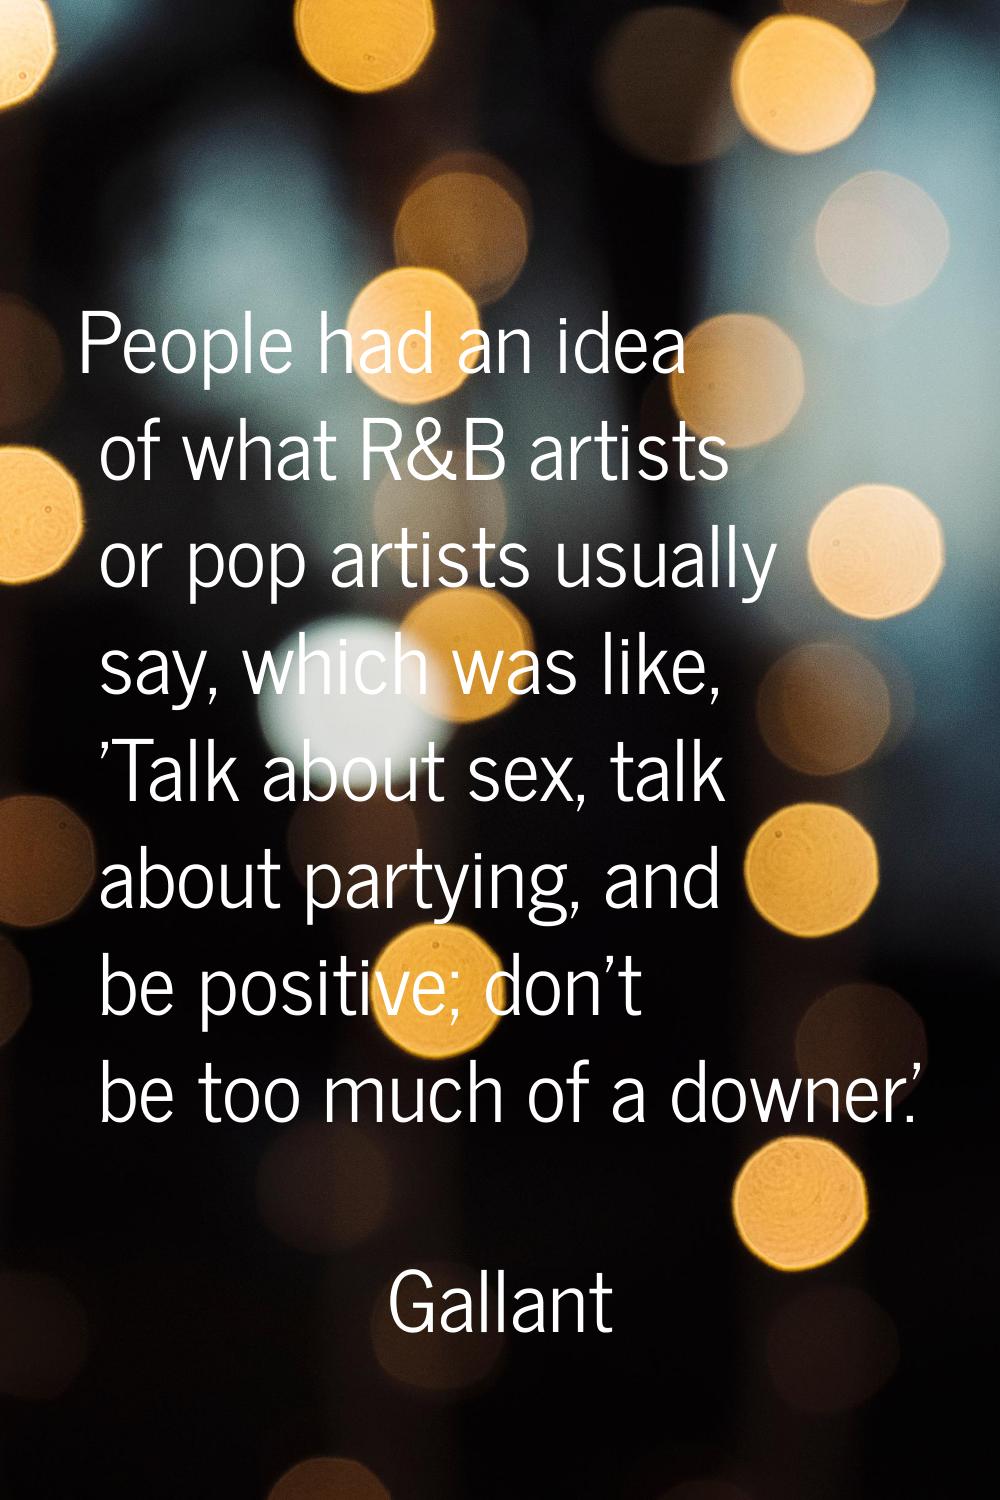 People had an idea of what R&B artists or pop artists usually say, which was like, 'Talk about sex,